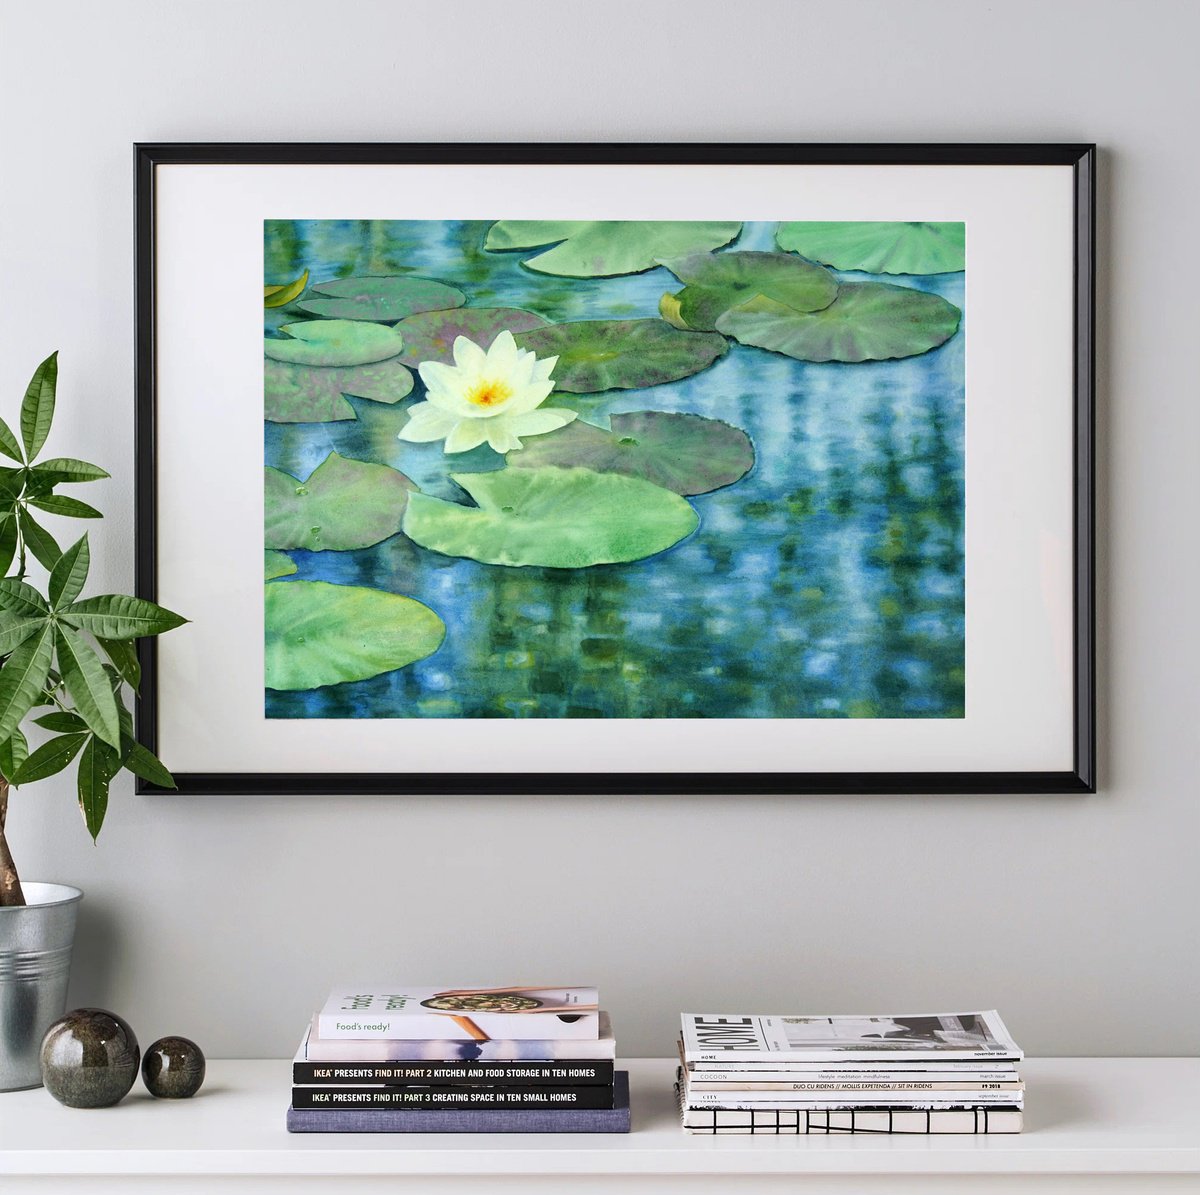 Lily Pad - Water Lilies - Lily painting - Water lilies - Water Lily Pond - waterlily lake by Olga Beliaeva Watercolour